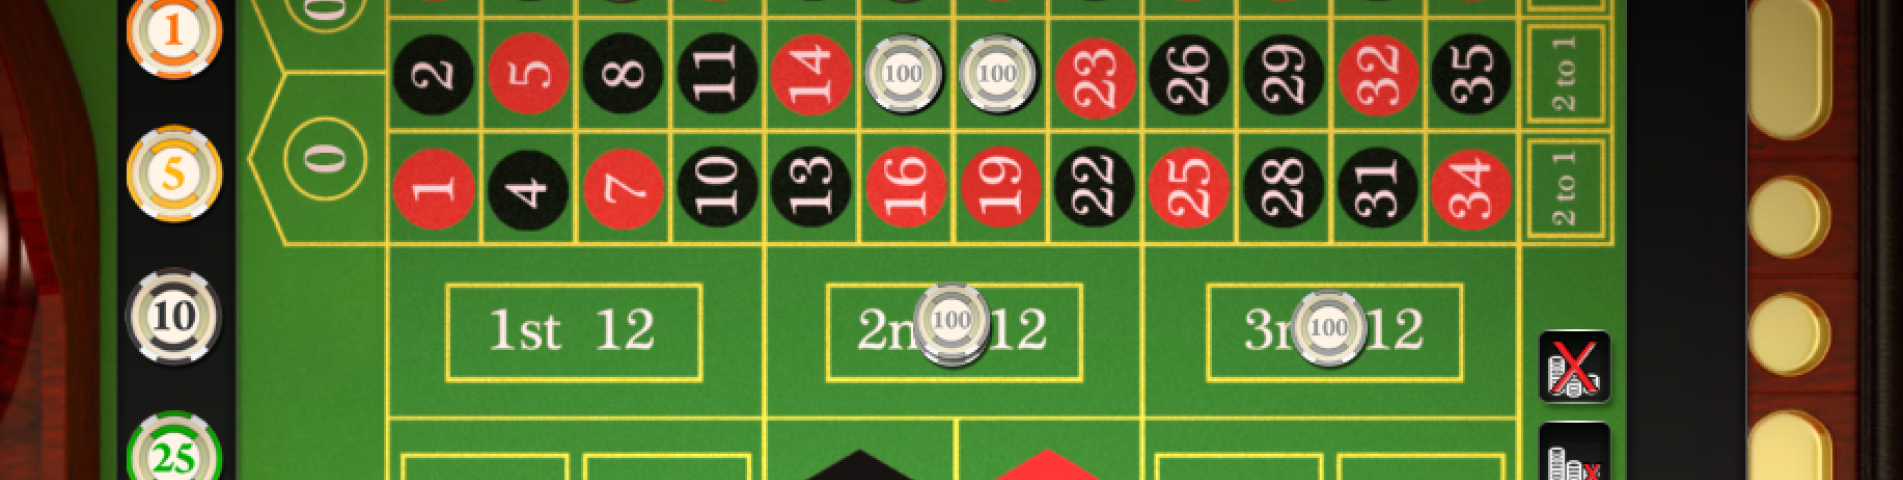 download roulette game for mobile